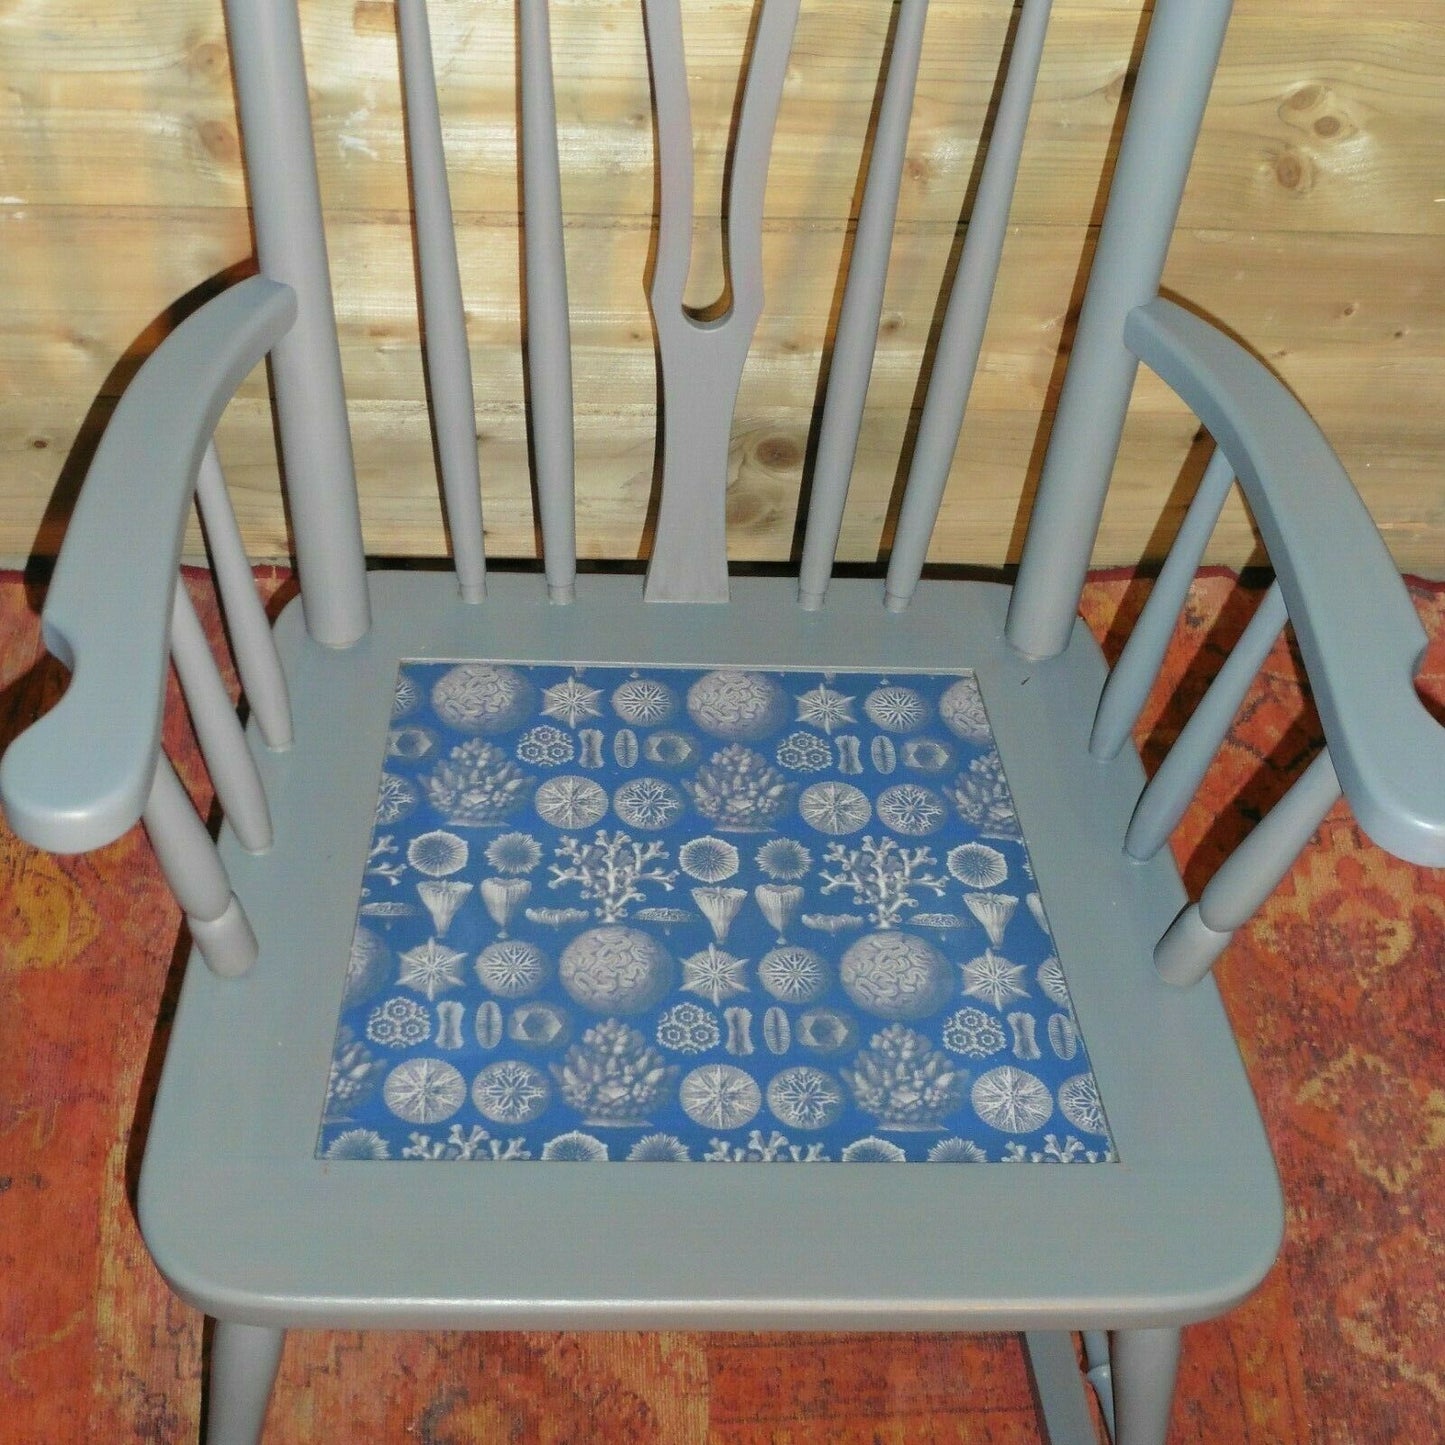 114.....Gorgeous Vintage Rocking Chair / Upcycled Rocking Chair